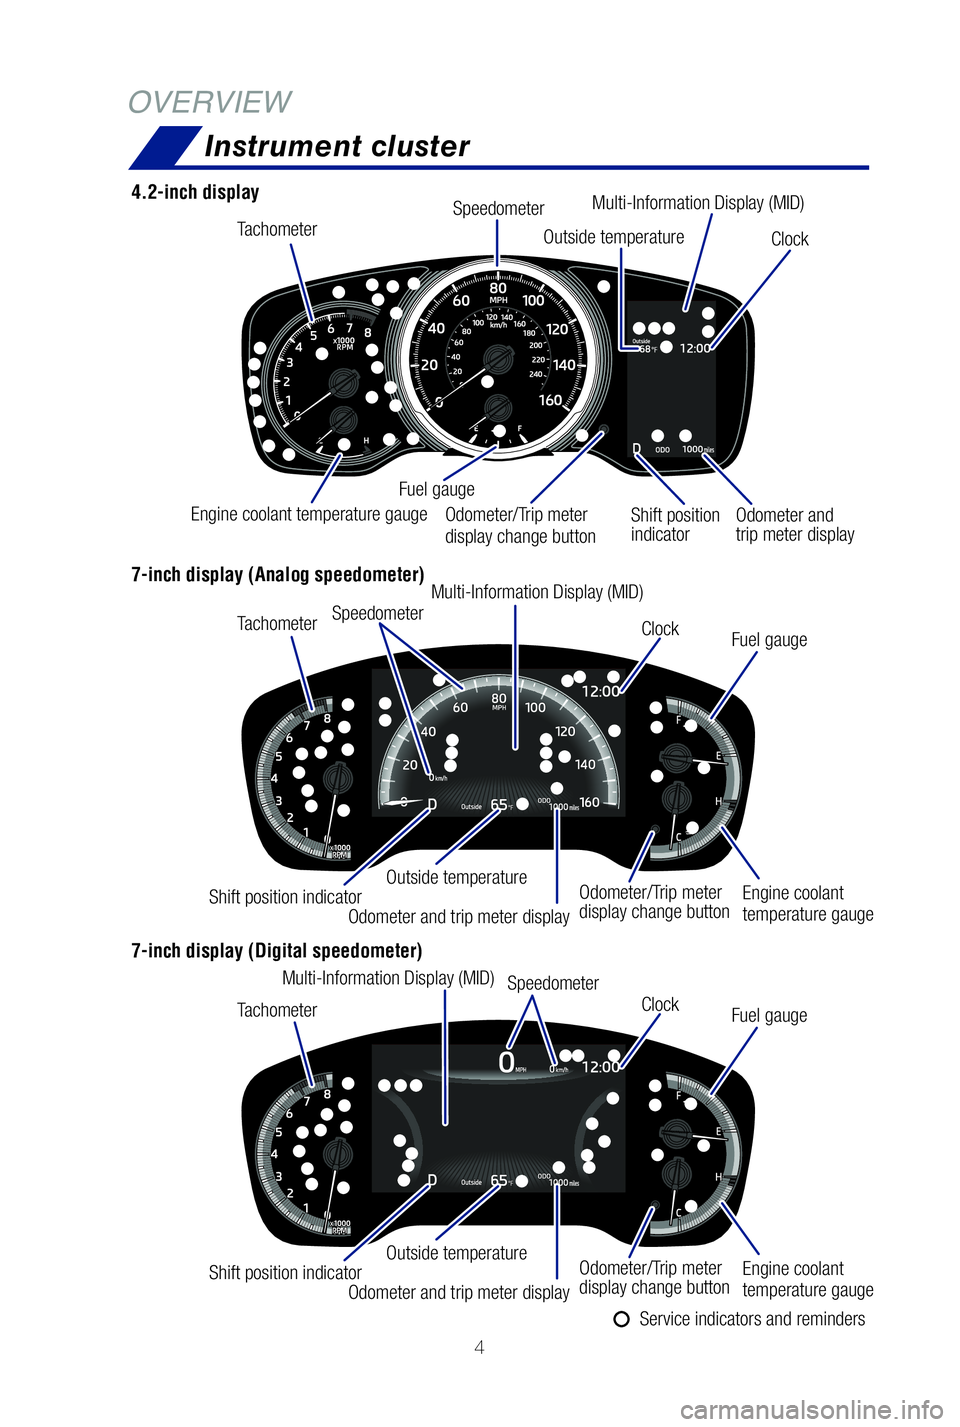 TOYOTA COROLLA 2020  Owners Manual (in English) 4
OVERVIEWInstrument cluster
Tachometer
Tachometer
Tachometer Speedometer 
Speedometer  Speedometer Outside temperature
Outside temperature
Outside temperature
Engine coolant temperature gauge
Odomete